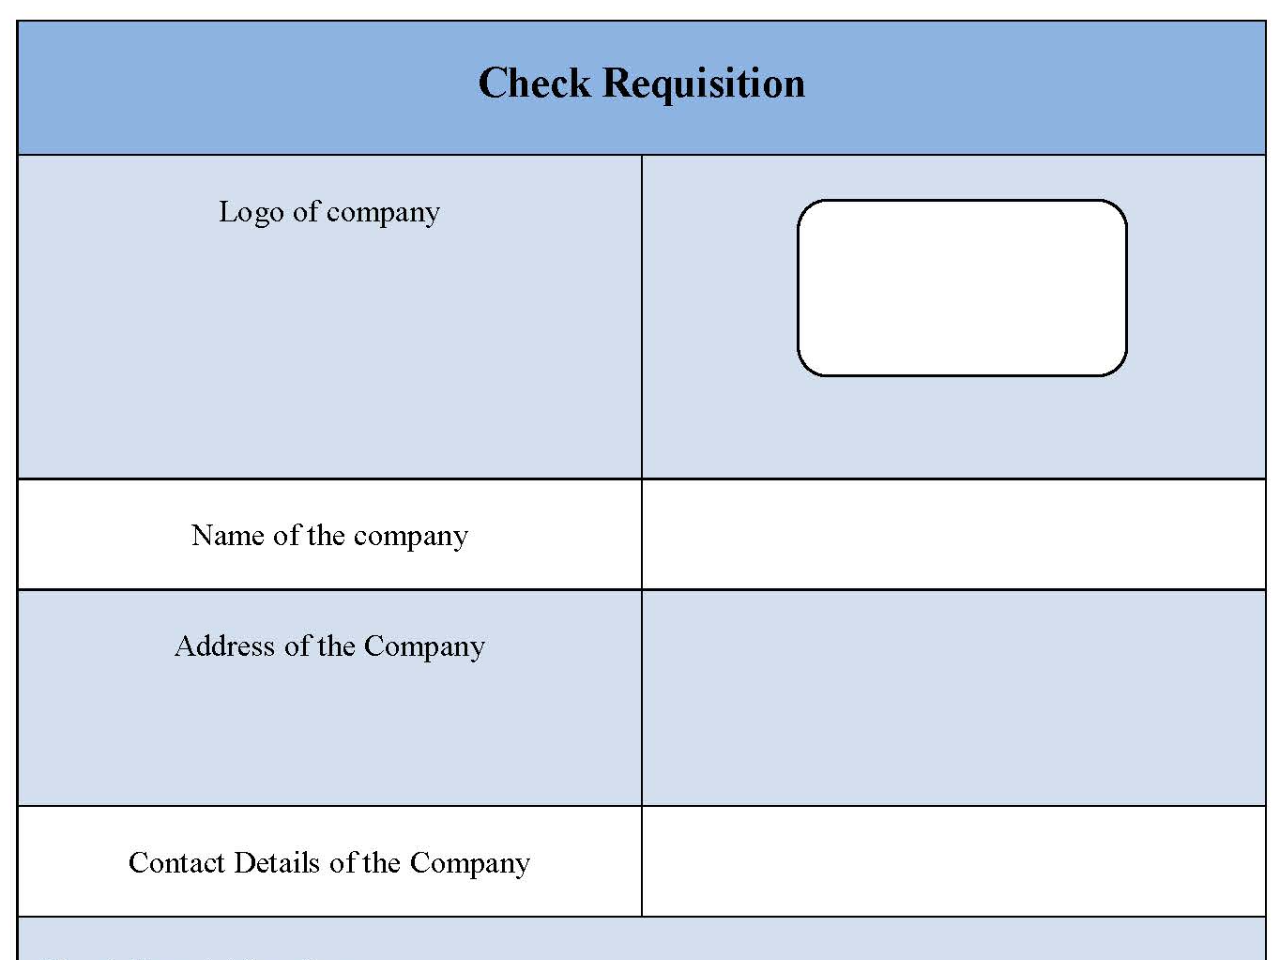 Check Requisition Form